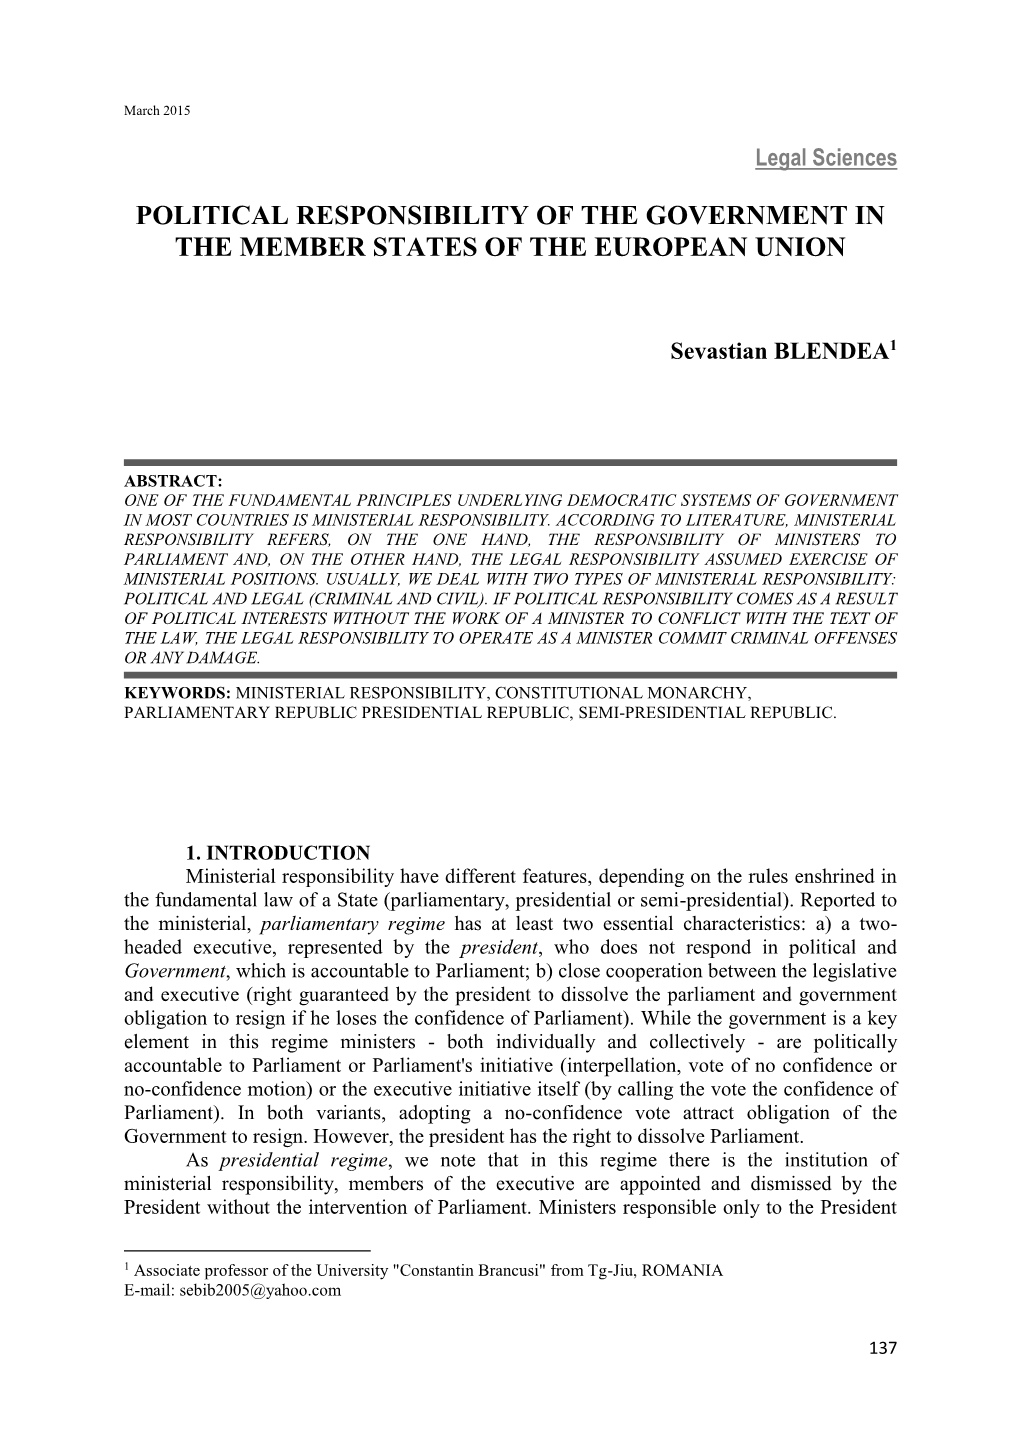 Political Responsibility of the Government in the Member States of the European Union